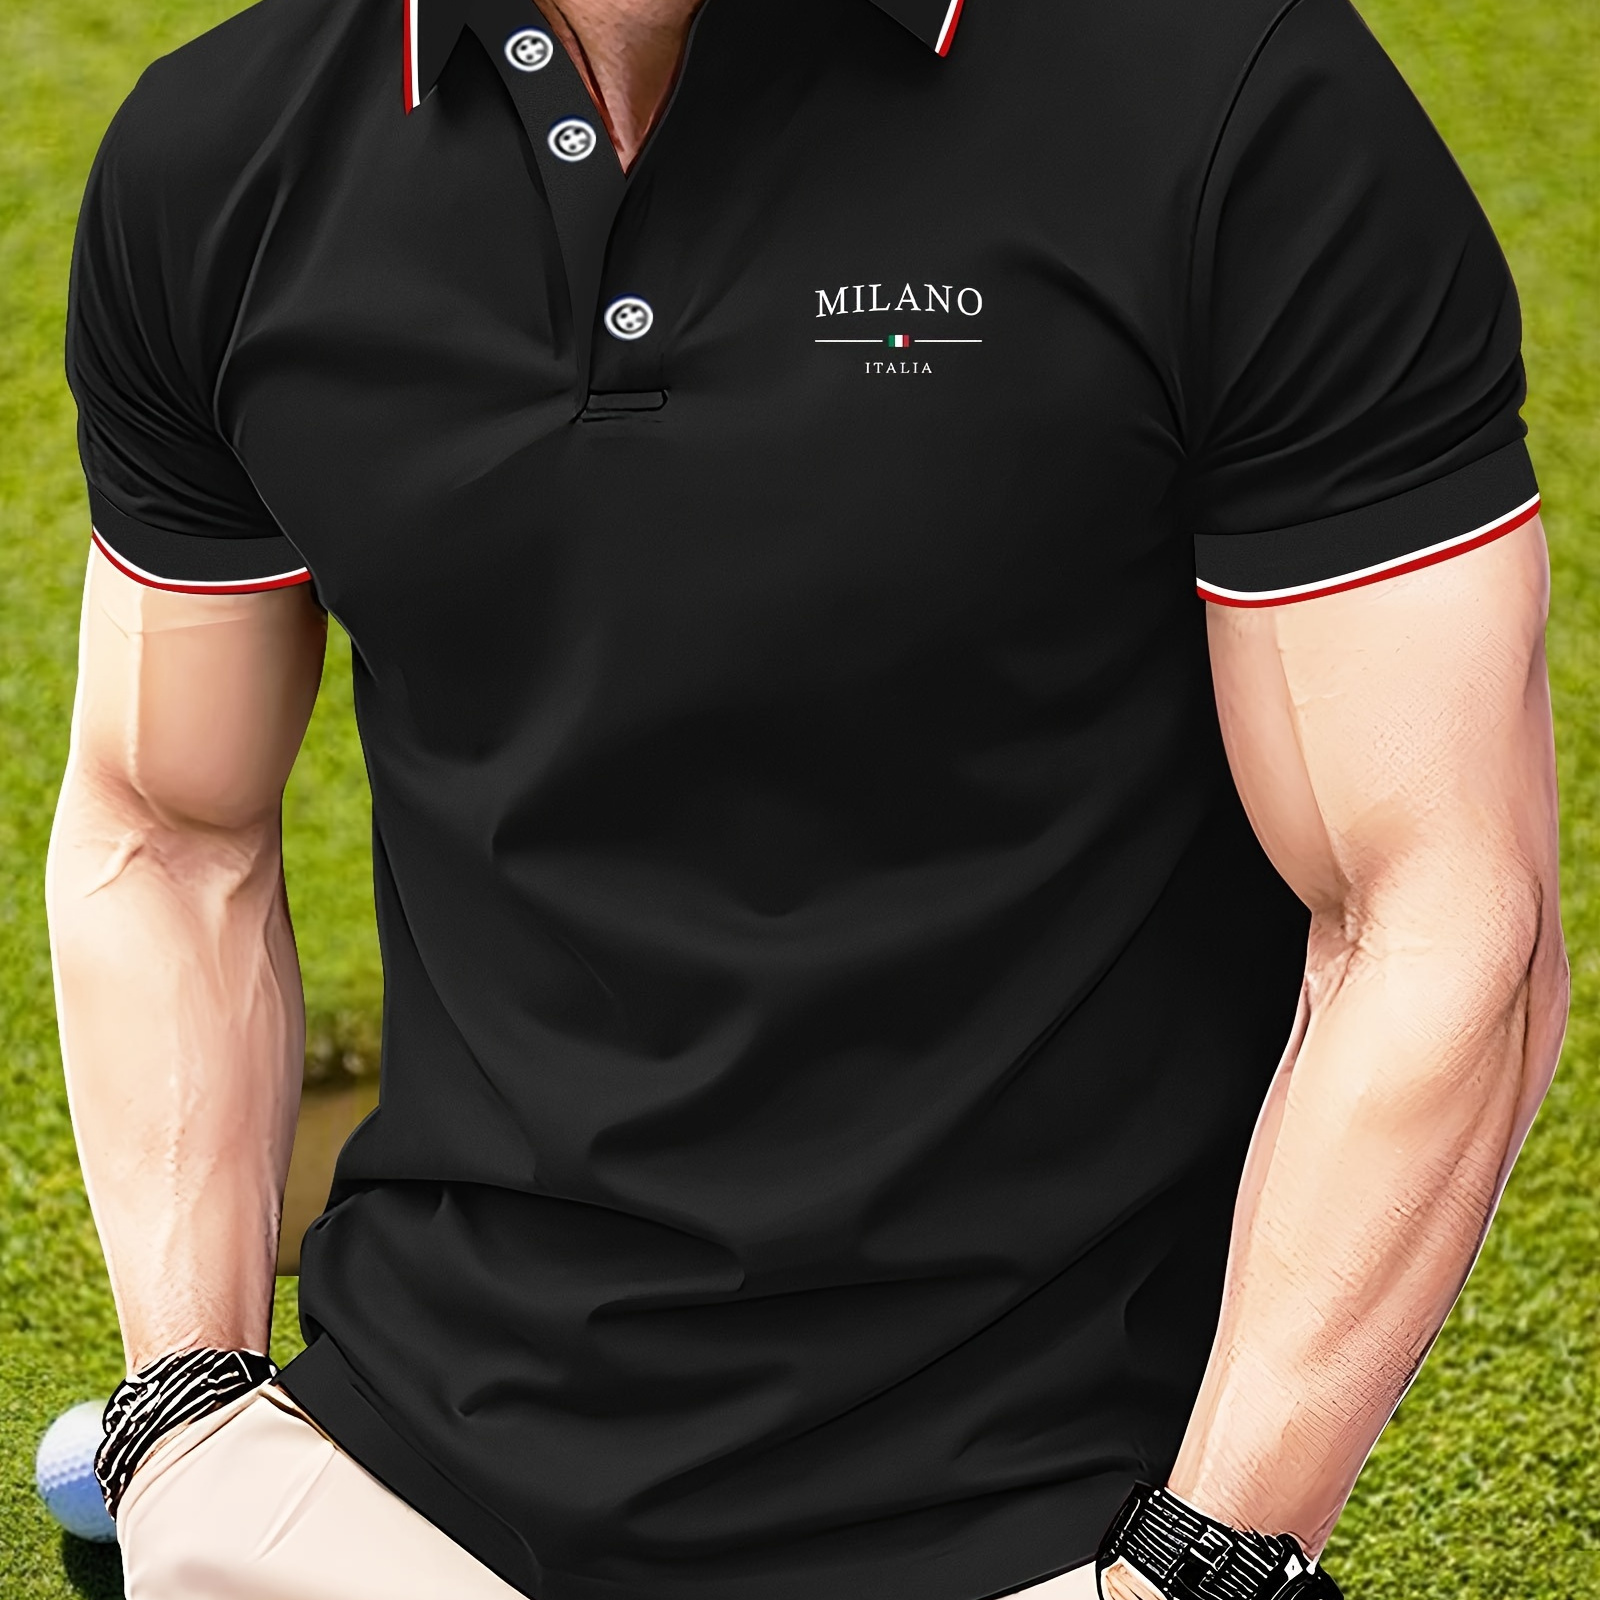 

Letter Milano Print Men's Short Sleeve Golf Shirt, Business Casual Comfy Top For Tennis Training